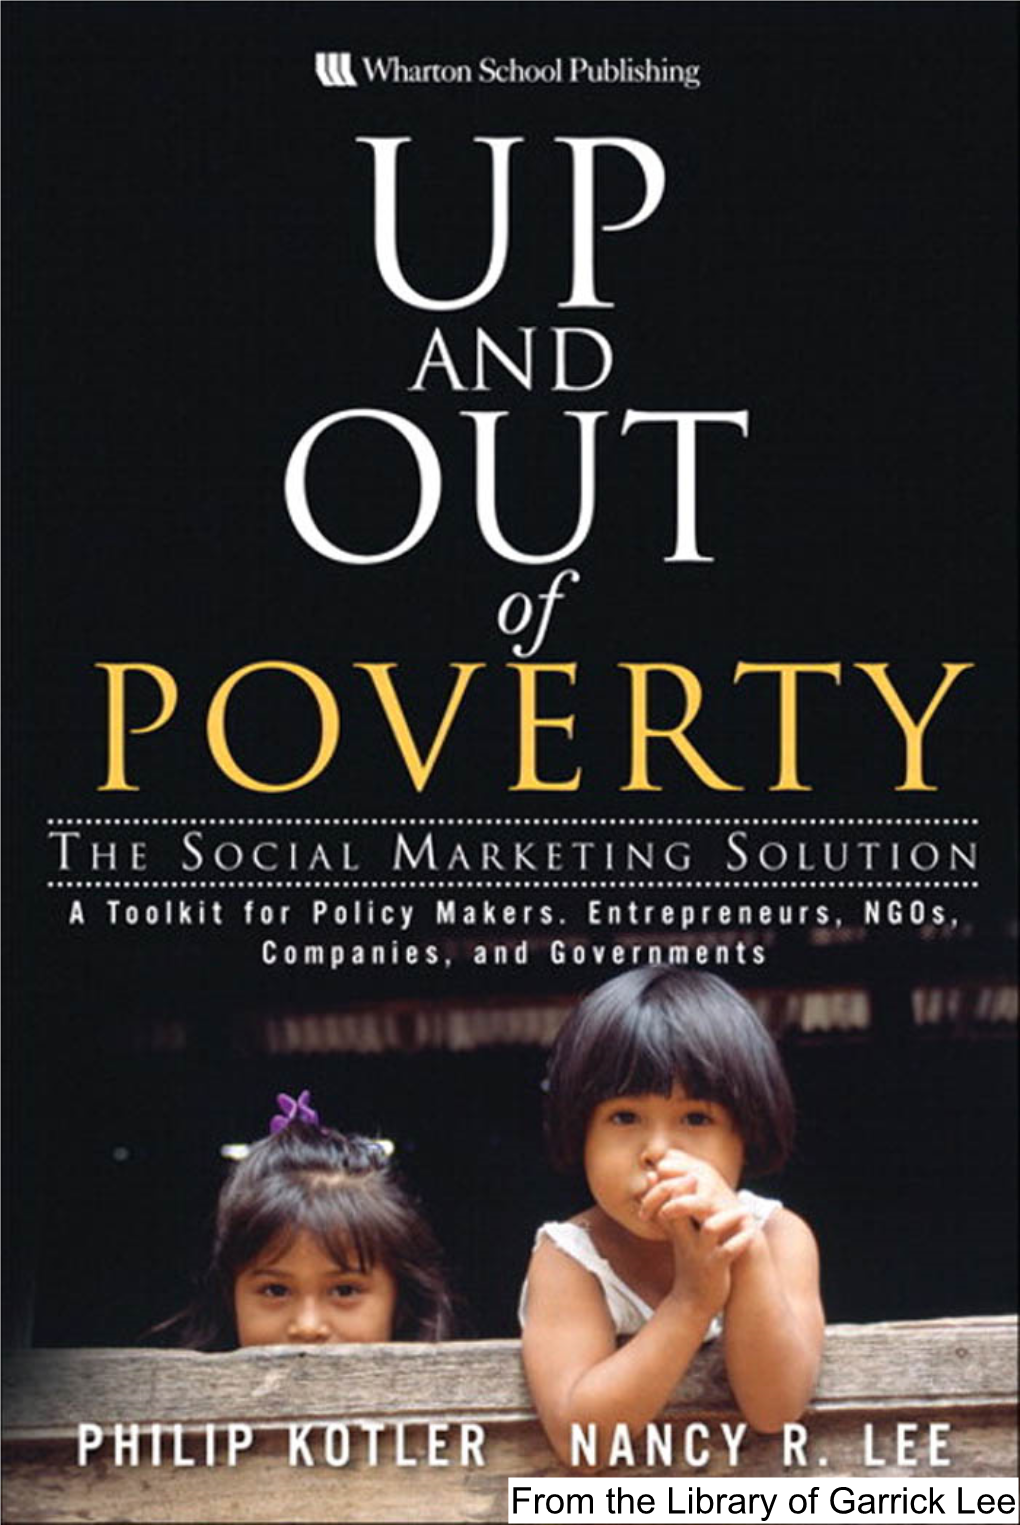 From the Library of Garrick Lee Praise for up and out of Poverty